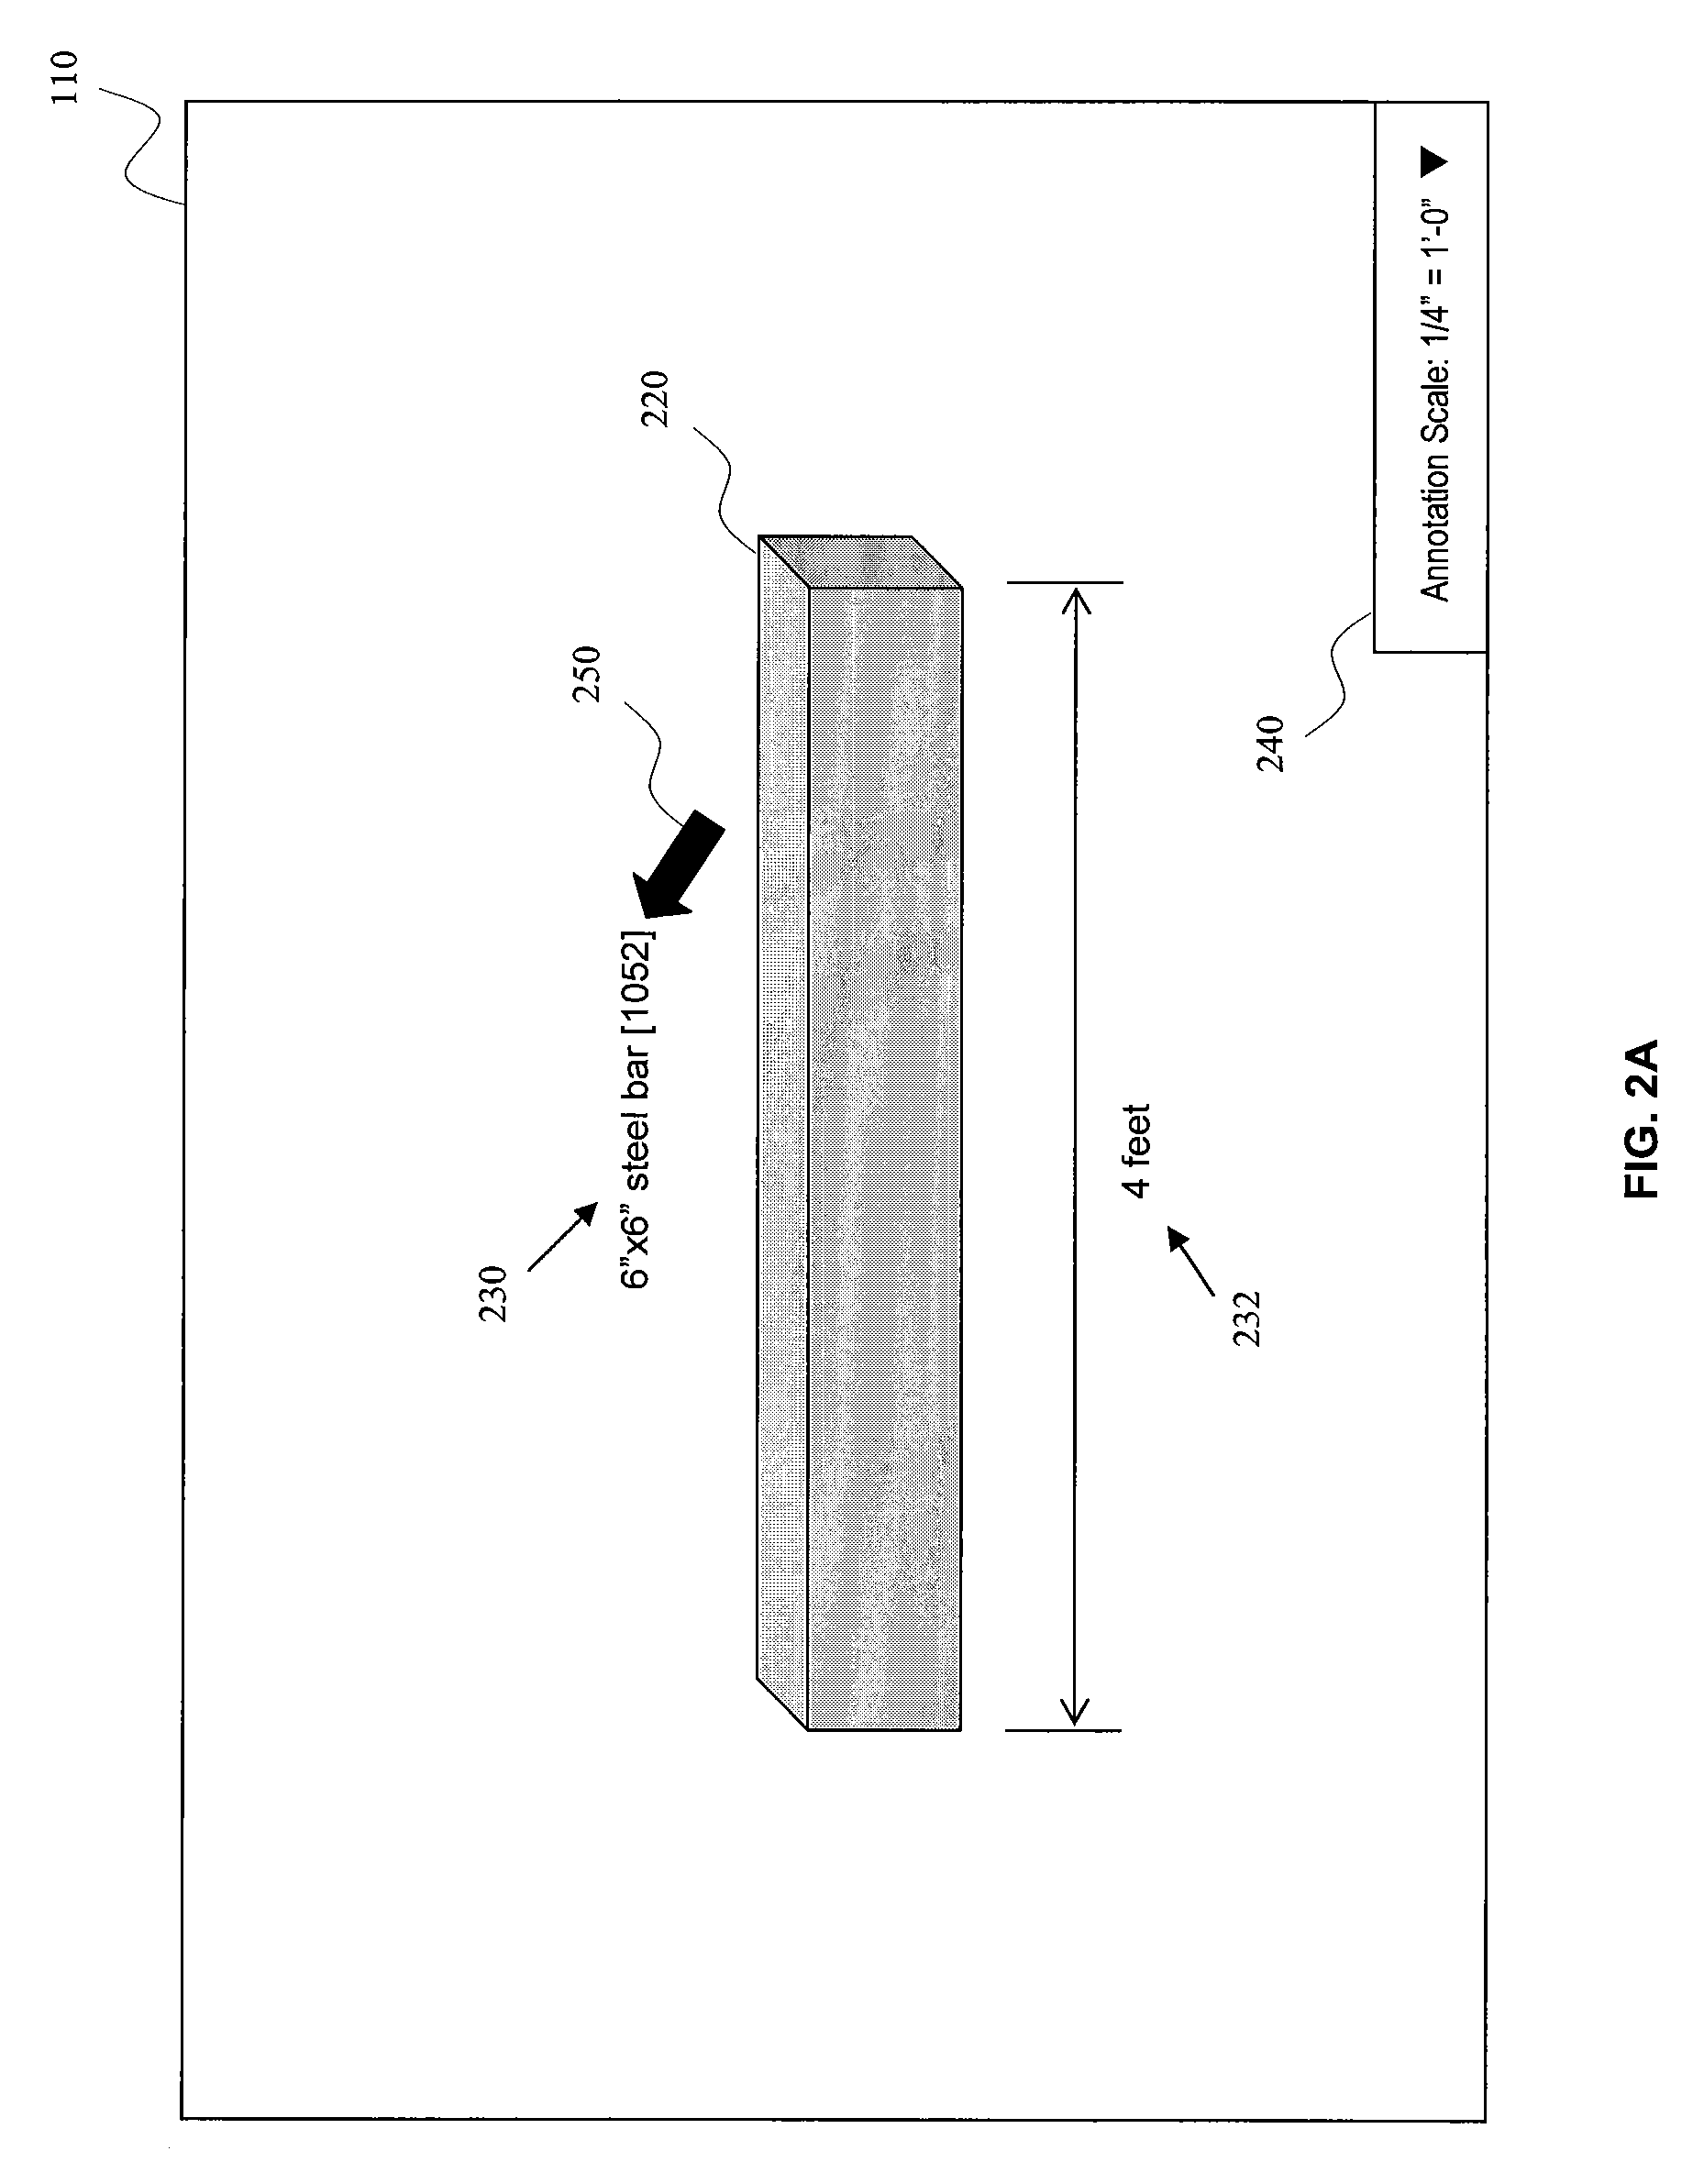 Method for managing annotations in a computer-aided design drawing